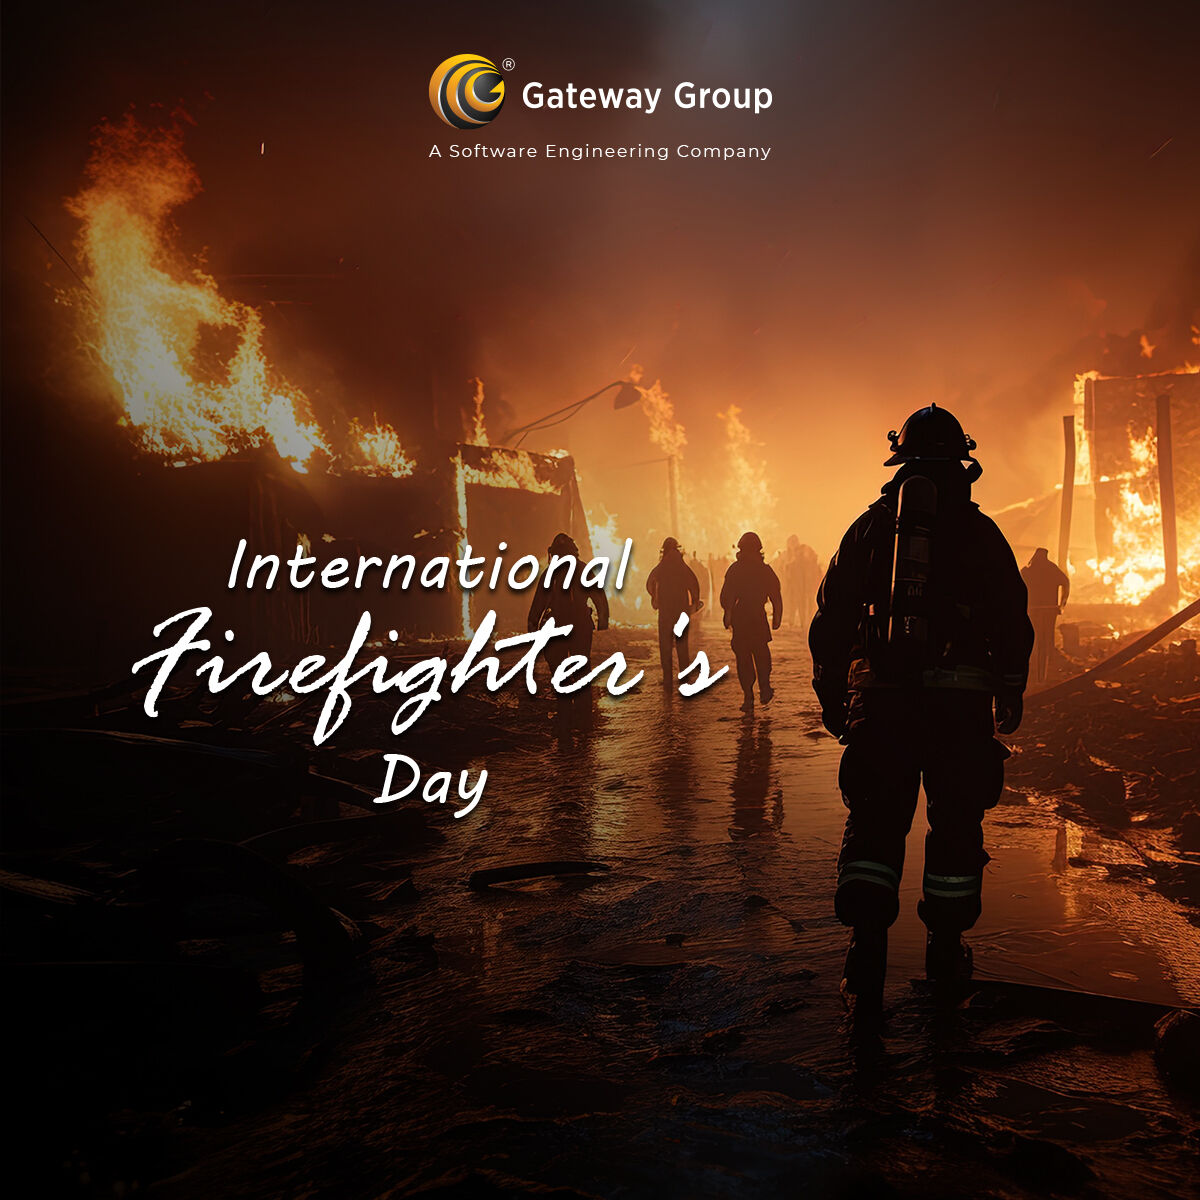 Happy International Firefighters’ Day!

Did you know? Wearing a red and blue ribbon today signifies support for our firefighting heroes. Red symbolizes the fire, and blue the water they use to put it out.

#gatewaygroup #firefightersday #firedepartment #firebrigade #unesco